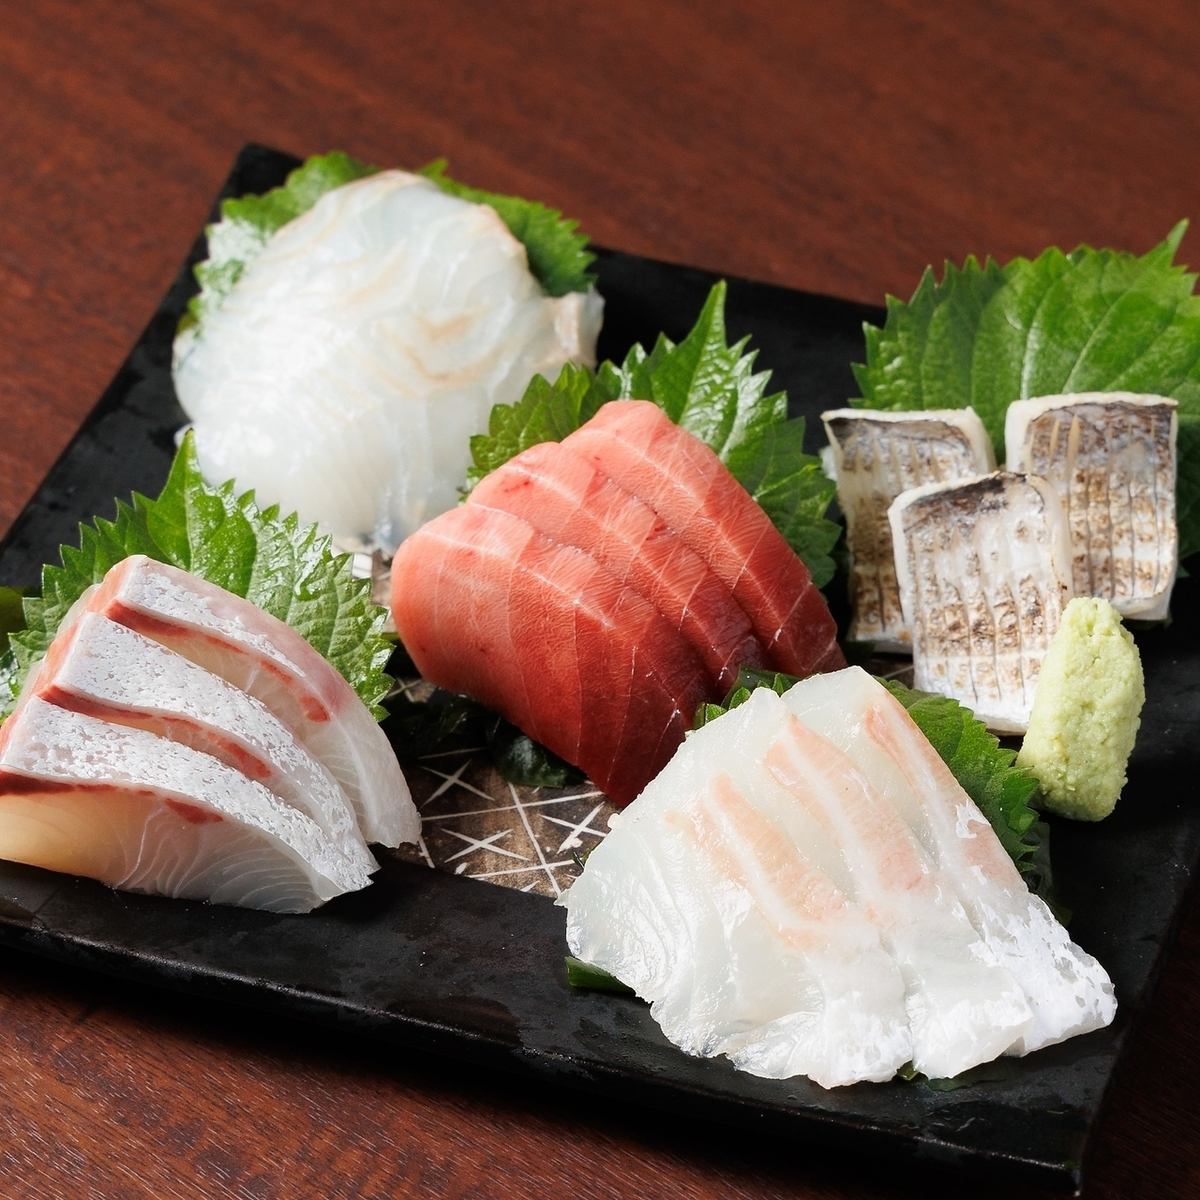 We also have Japanese courses such as sashimi made with fresh seafood!